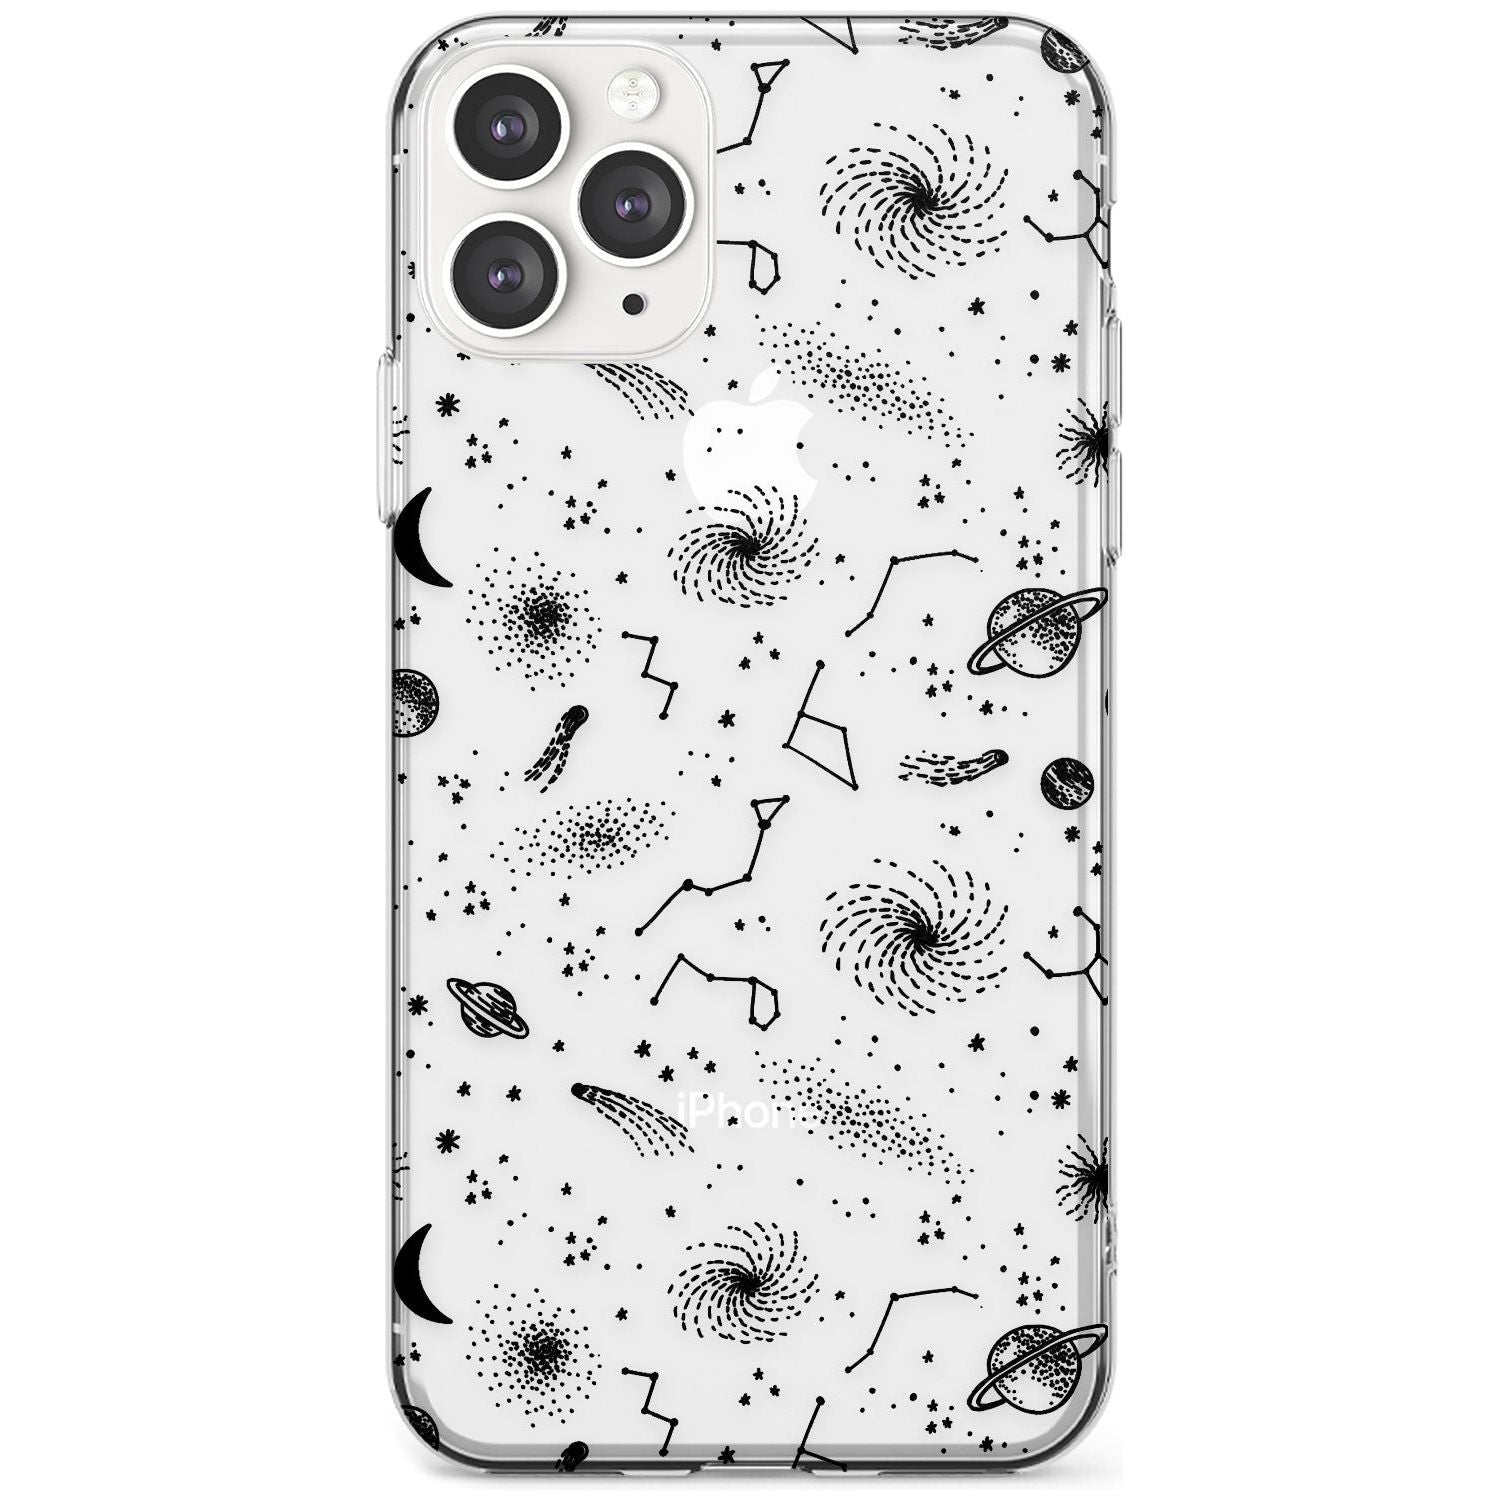 Mixed Galaxy Pattern Slim TPU Phone Case for iPhone 11 Pro Max